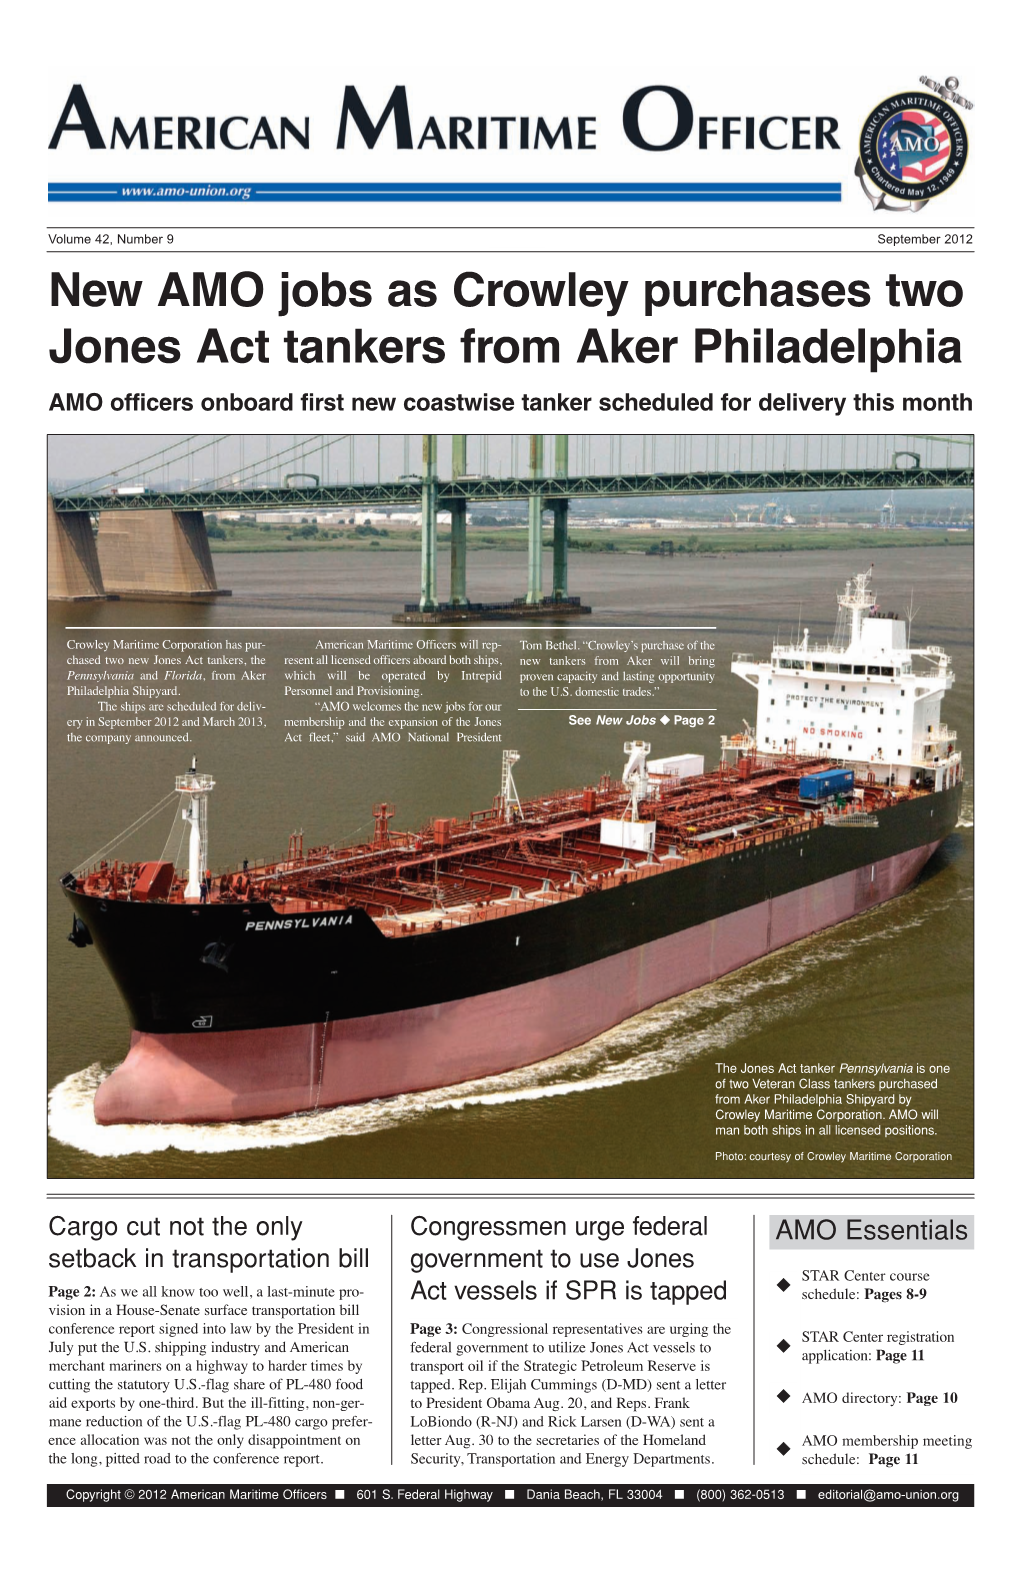 New AMO Jobs As Crowley Purchases Two Jones Act Tankers from Aker Philadelphia AMO Officers Onboard First New Coastwise Tanker Scheduled for Delivery This Month